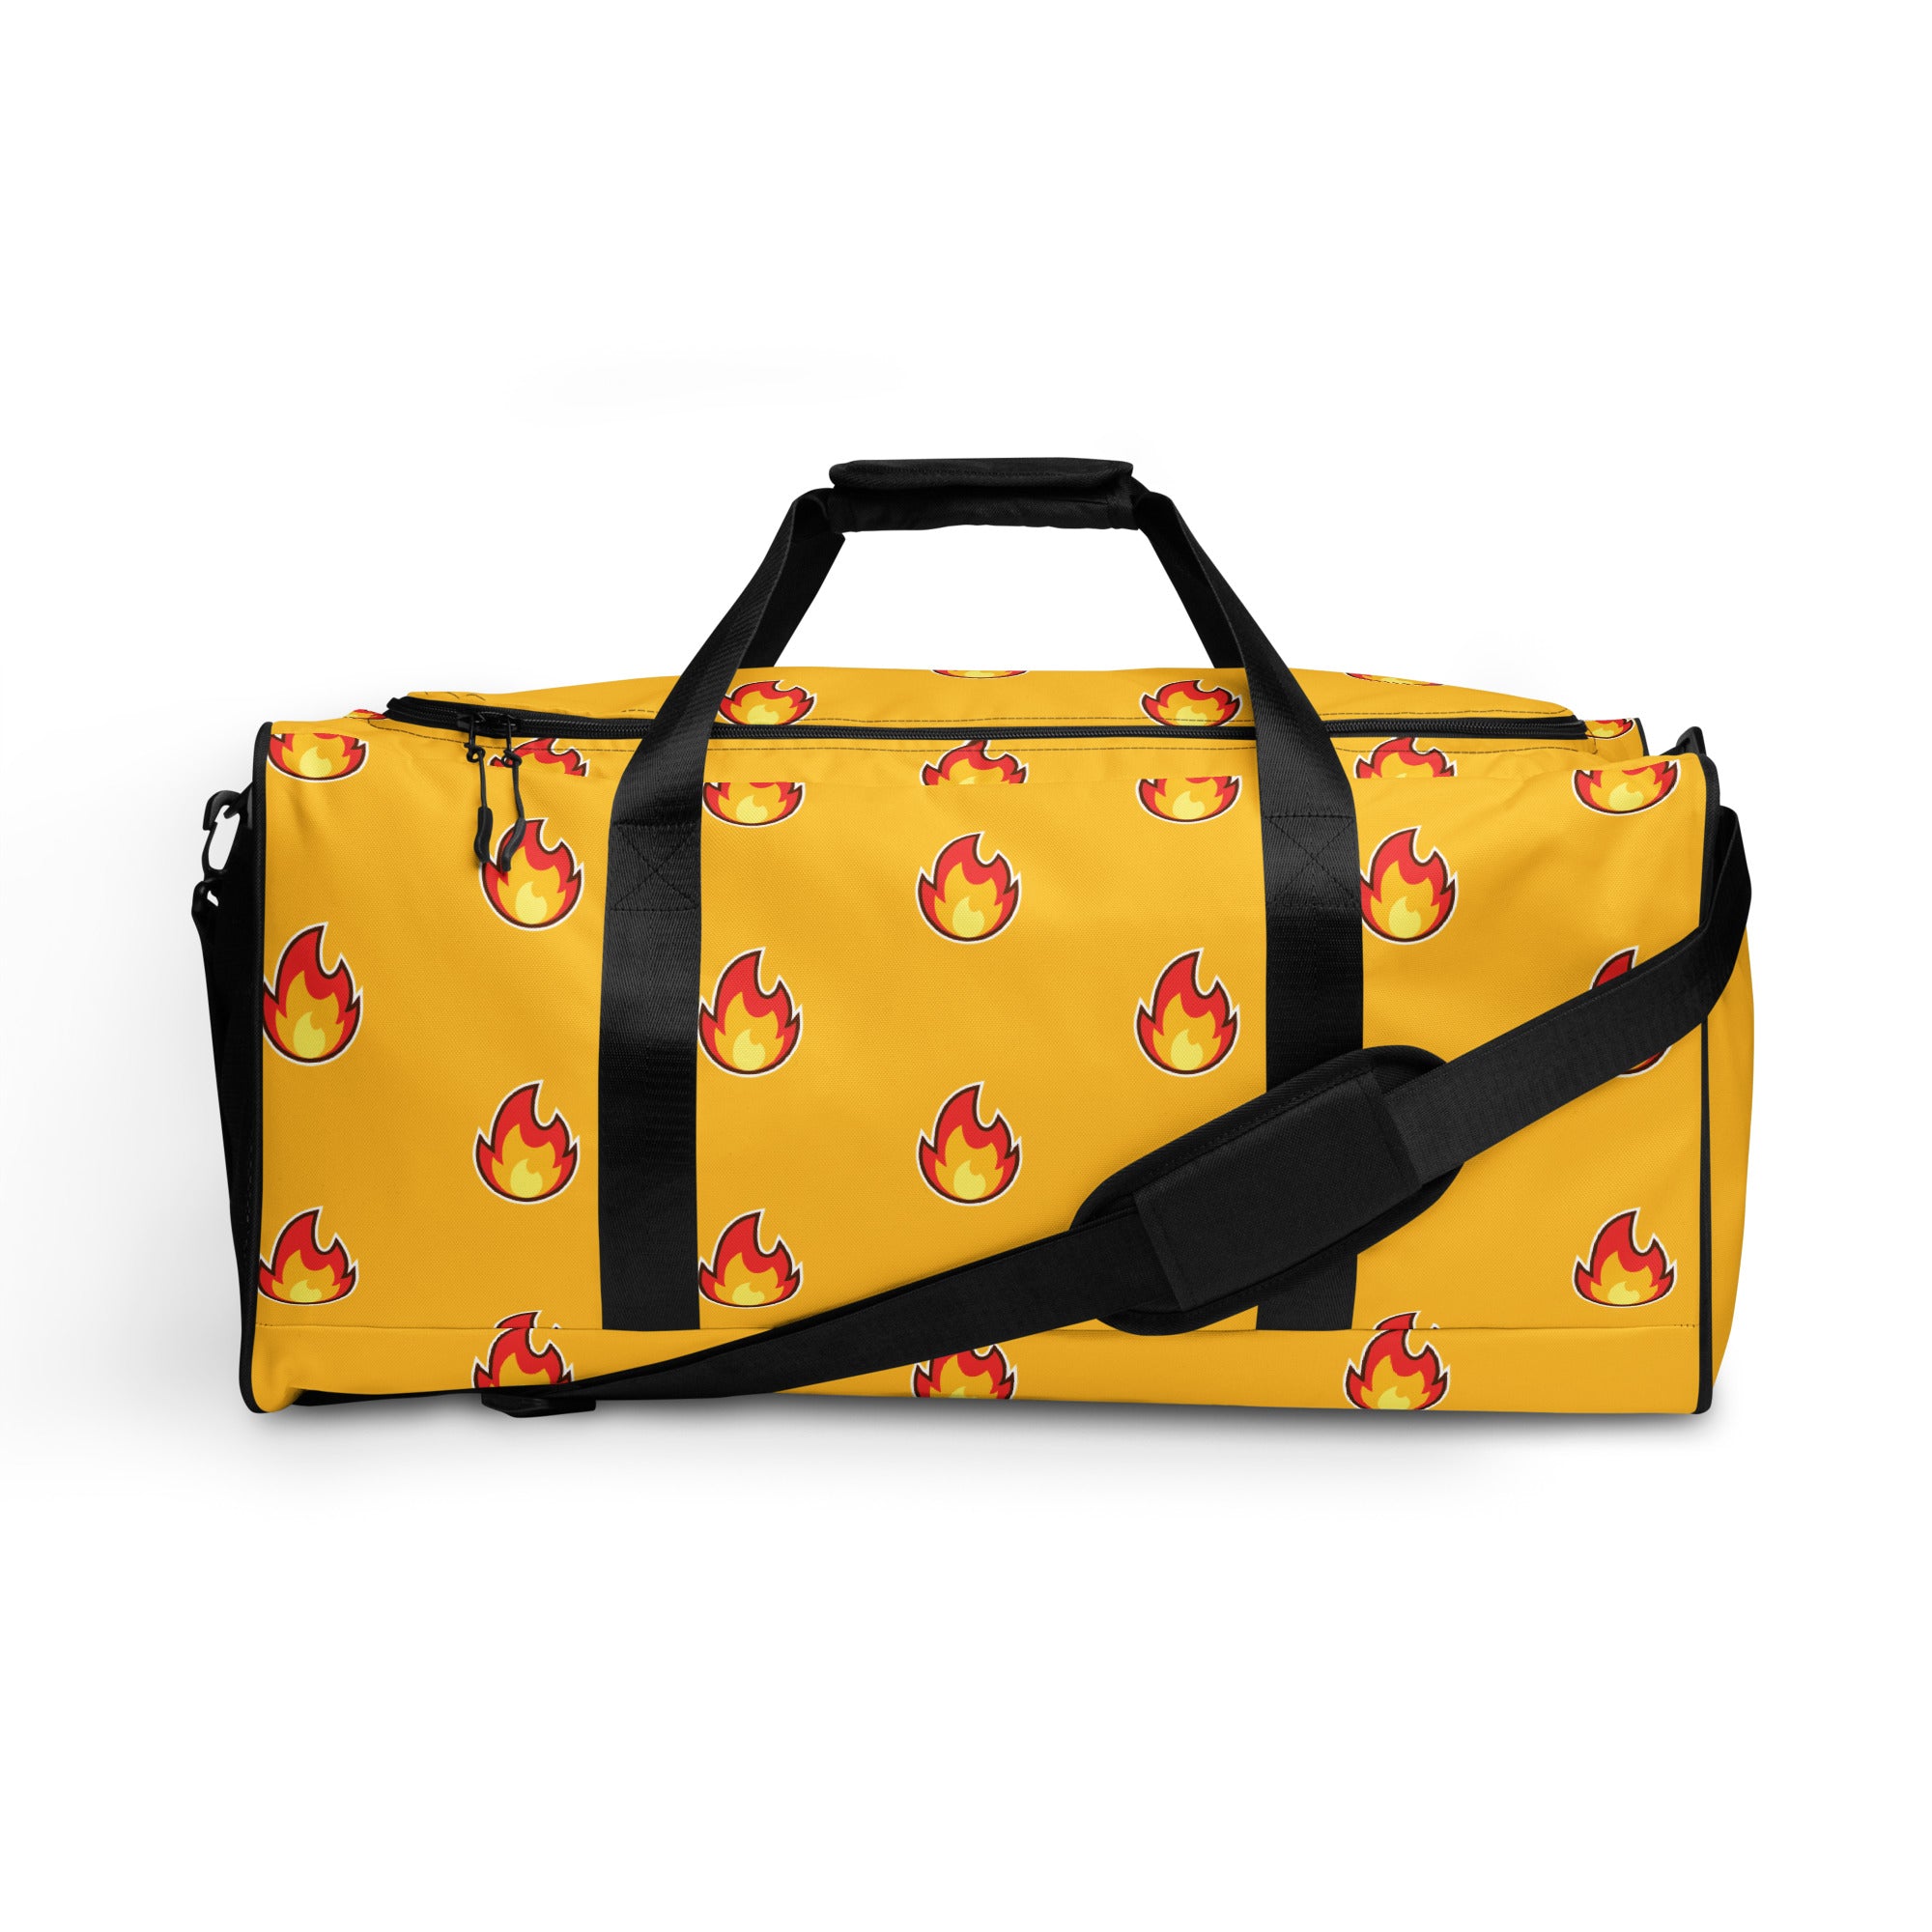 Yellow gold duffle bag with "fire" emoji design all over it. Black handles and strap make colors pop.